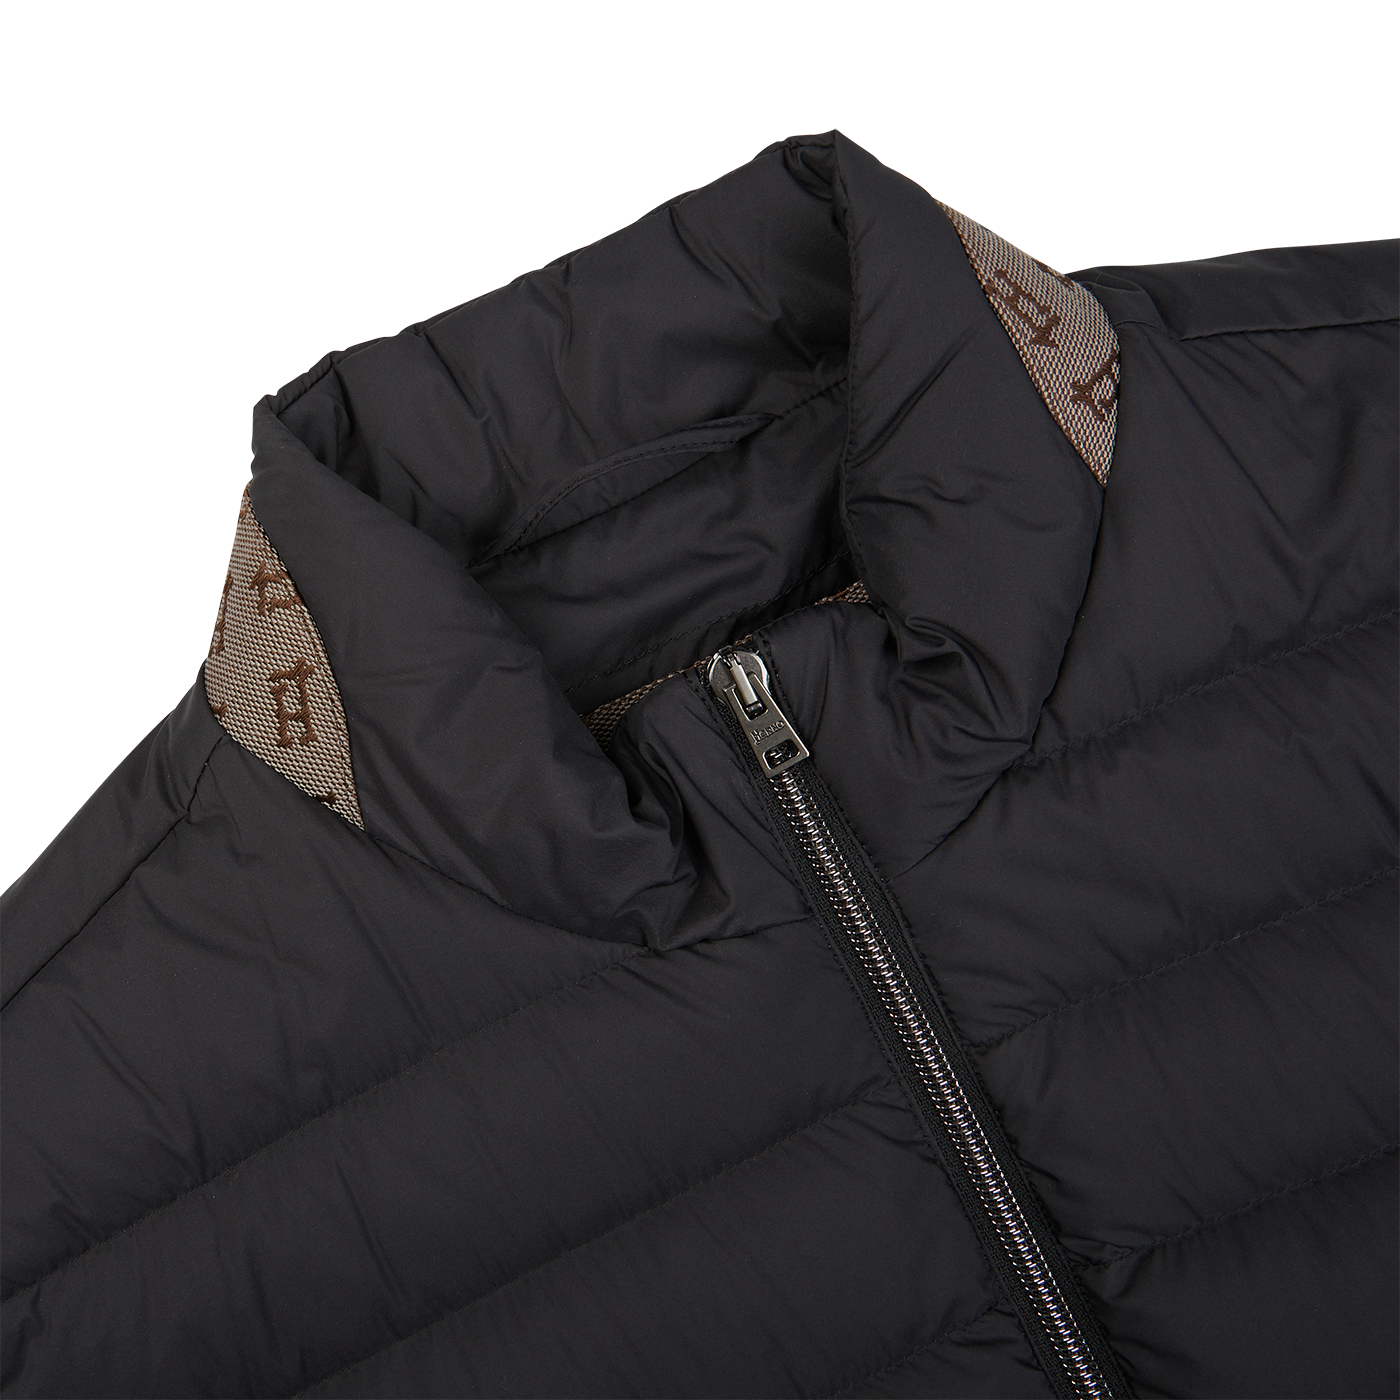 An Italian outerwear Herno black nylon goose down quilted gilet with a zippered collar.